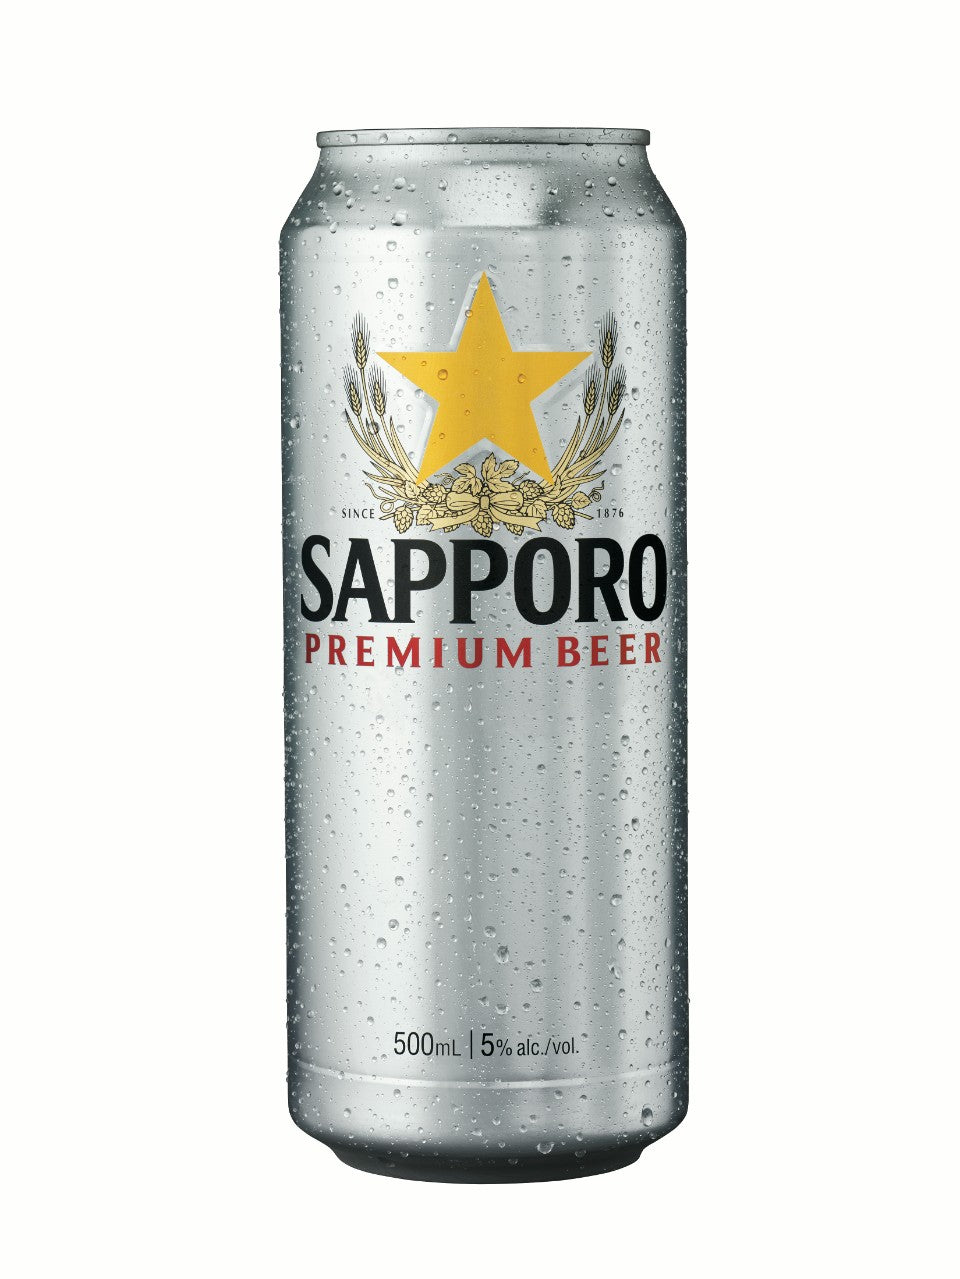 Sapporo Premium Beer  500 mL can